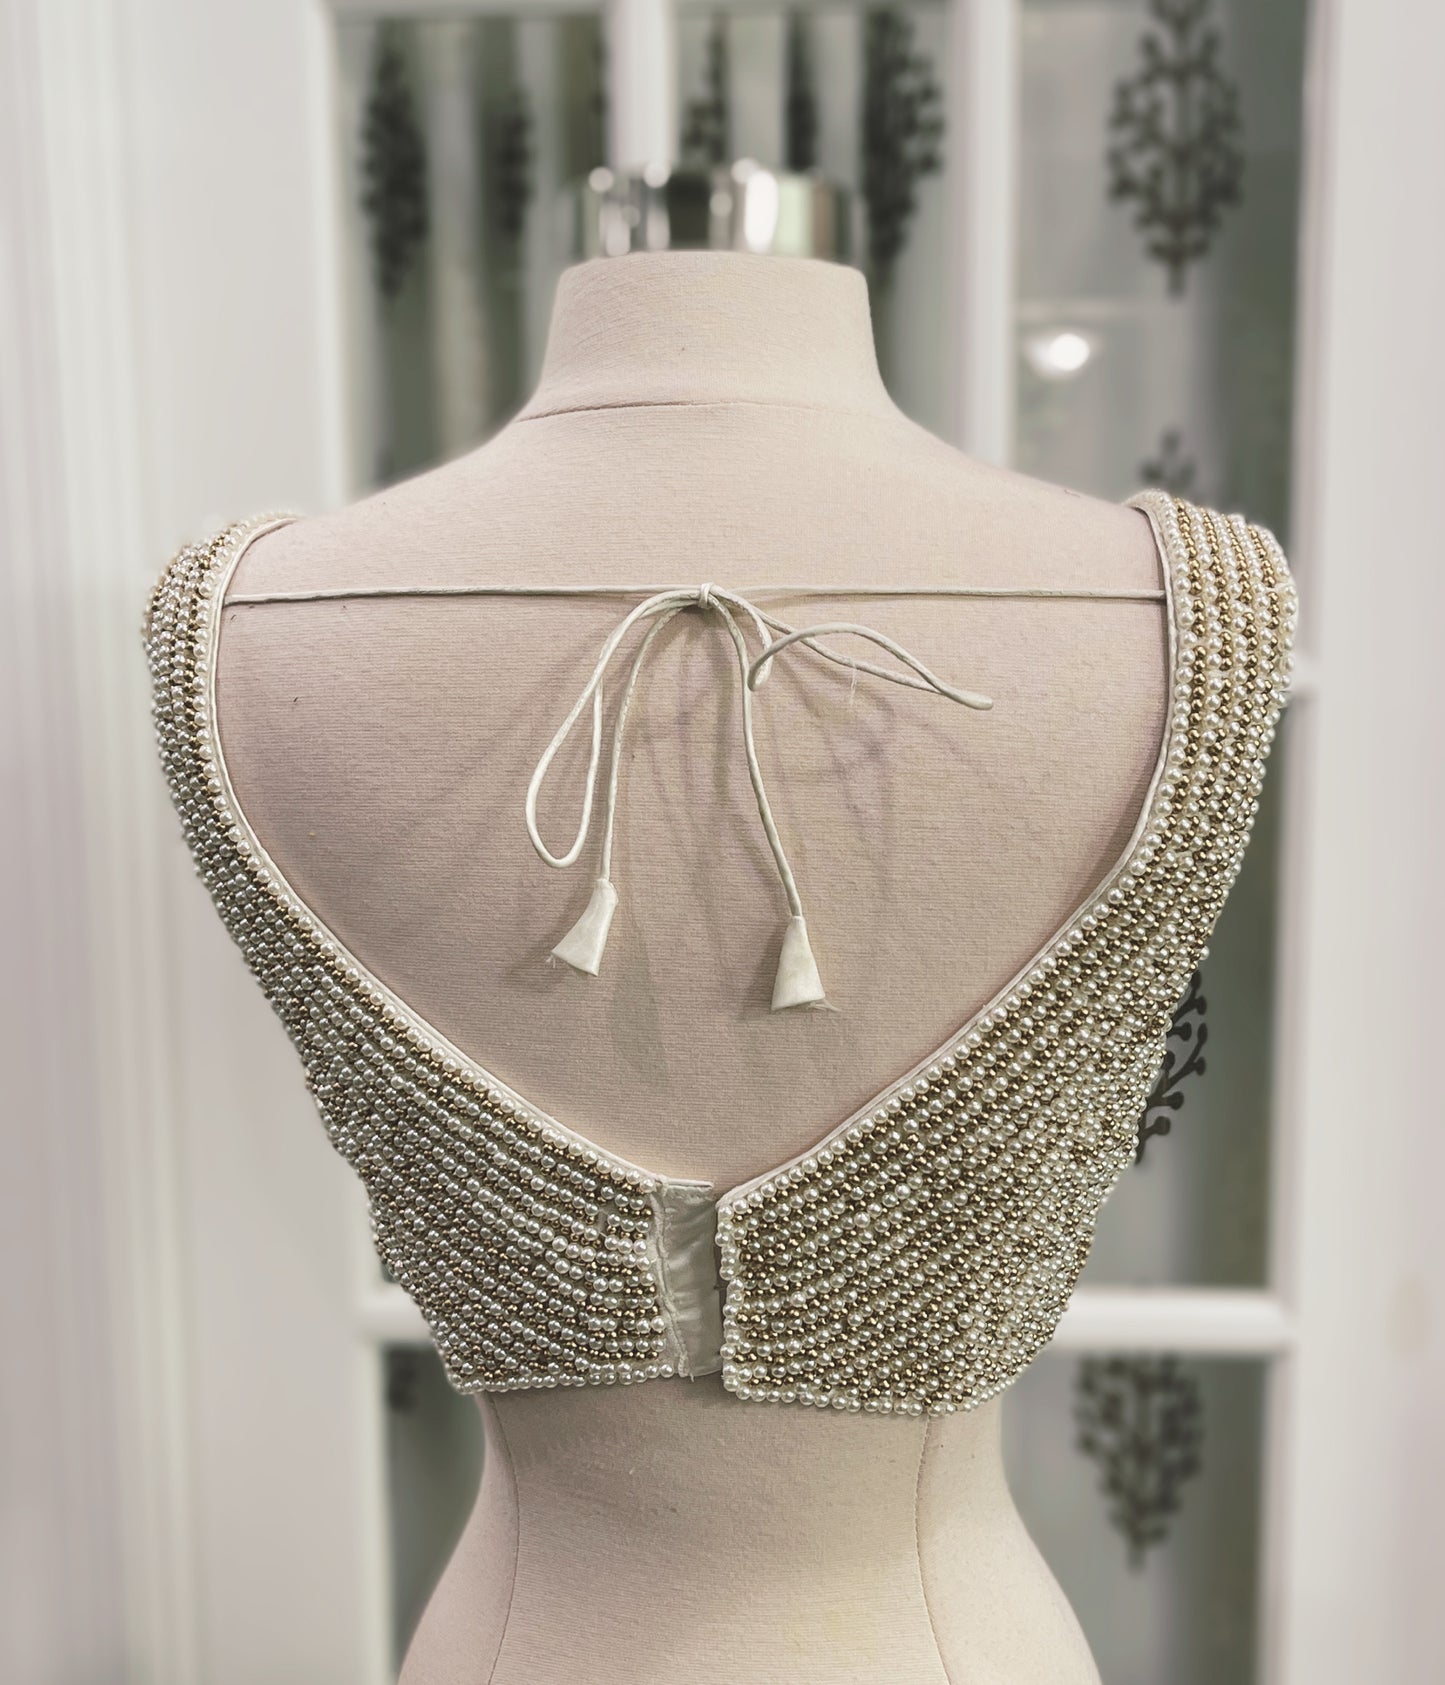 Elegant Bead work Blouse across entire blouse in Gold and Pearl color